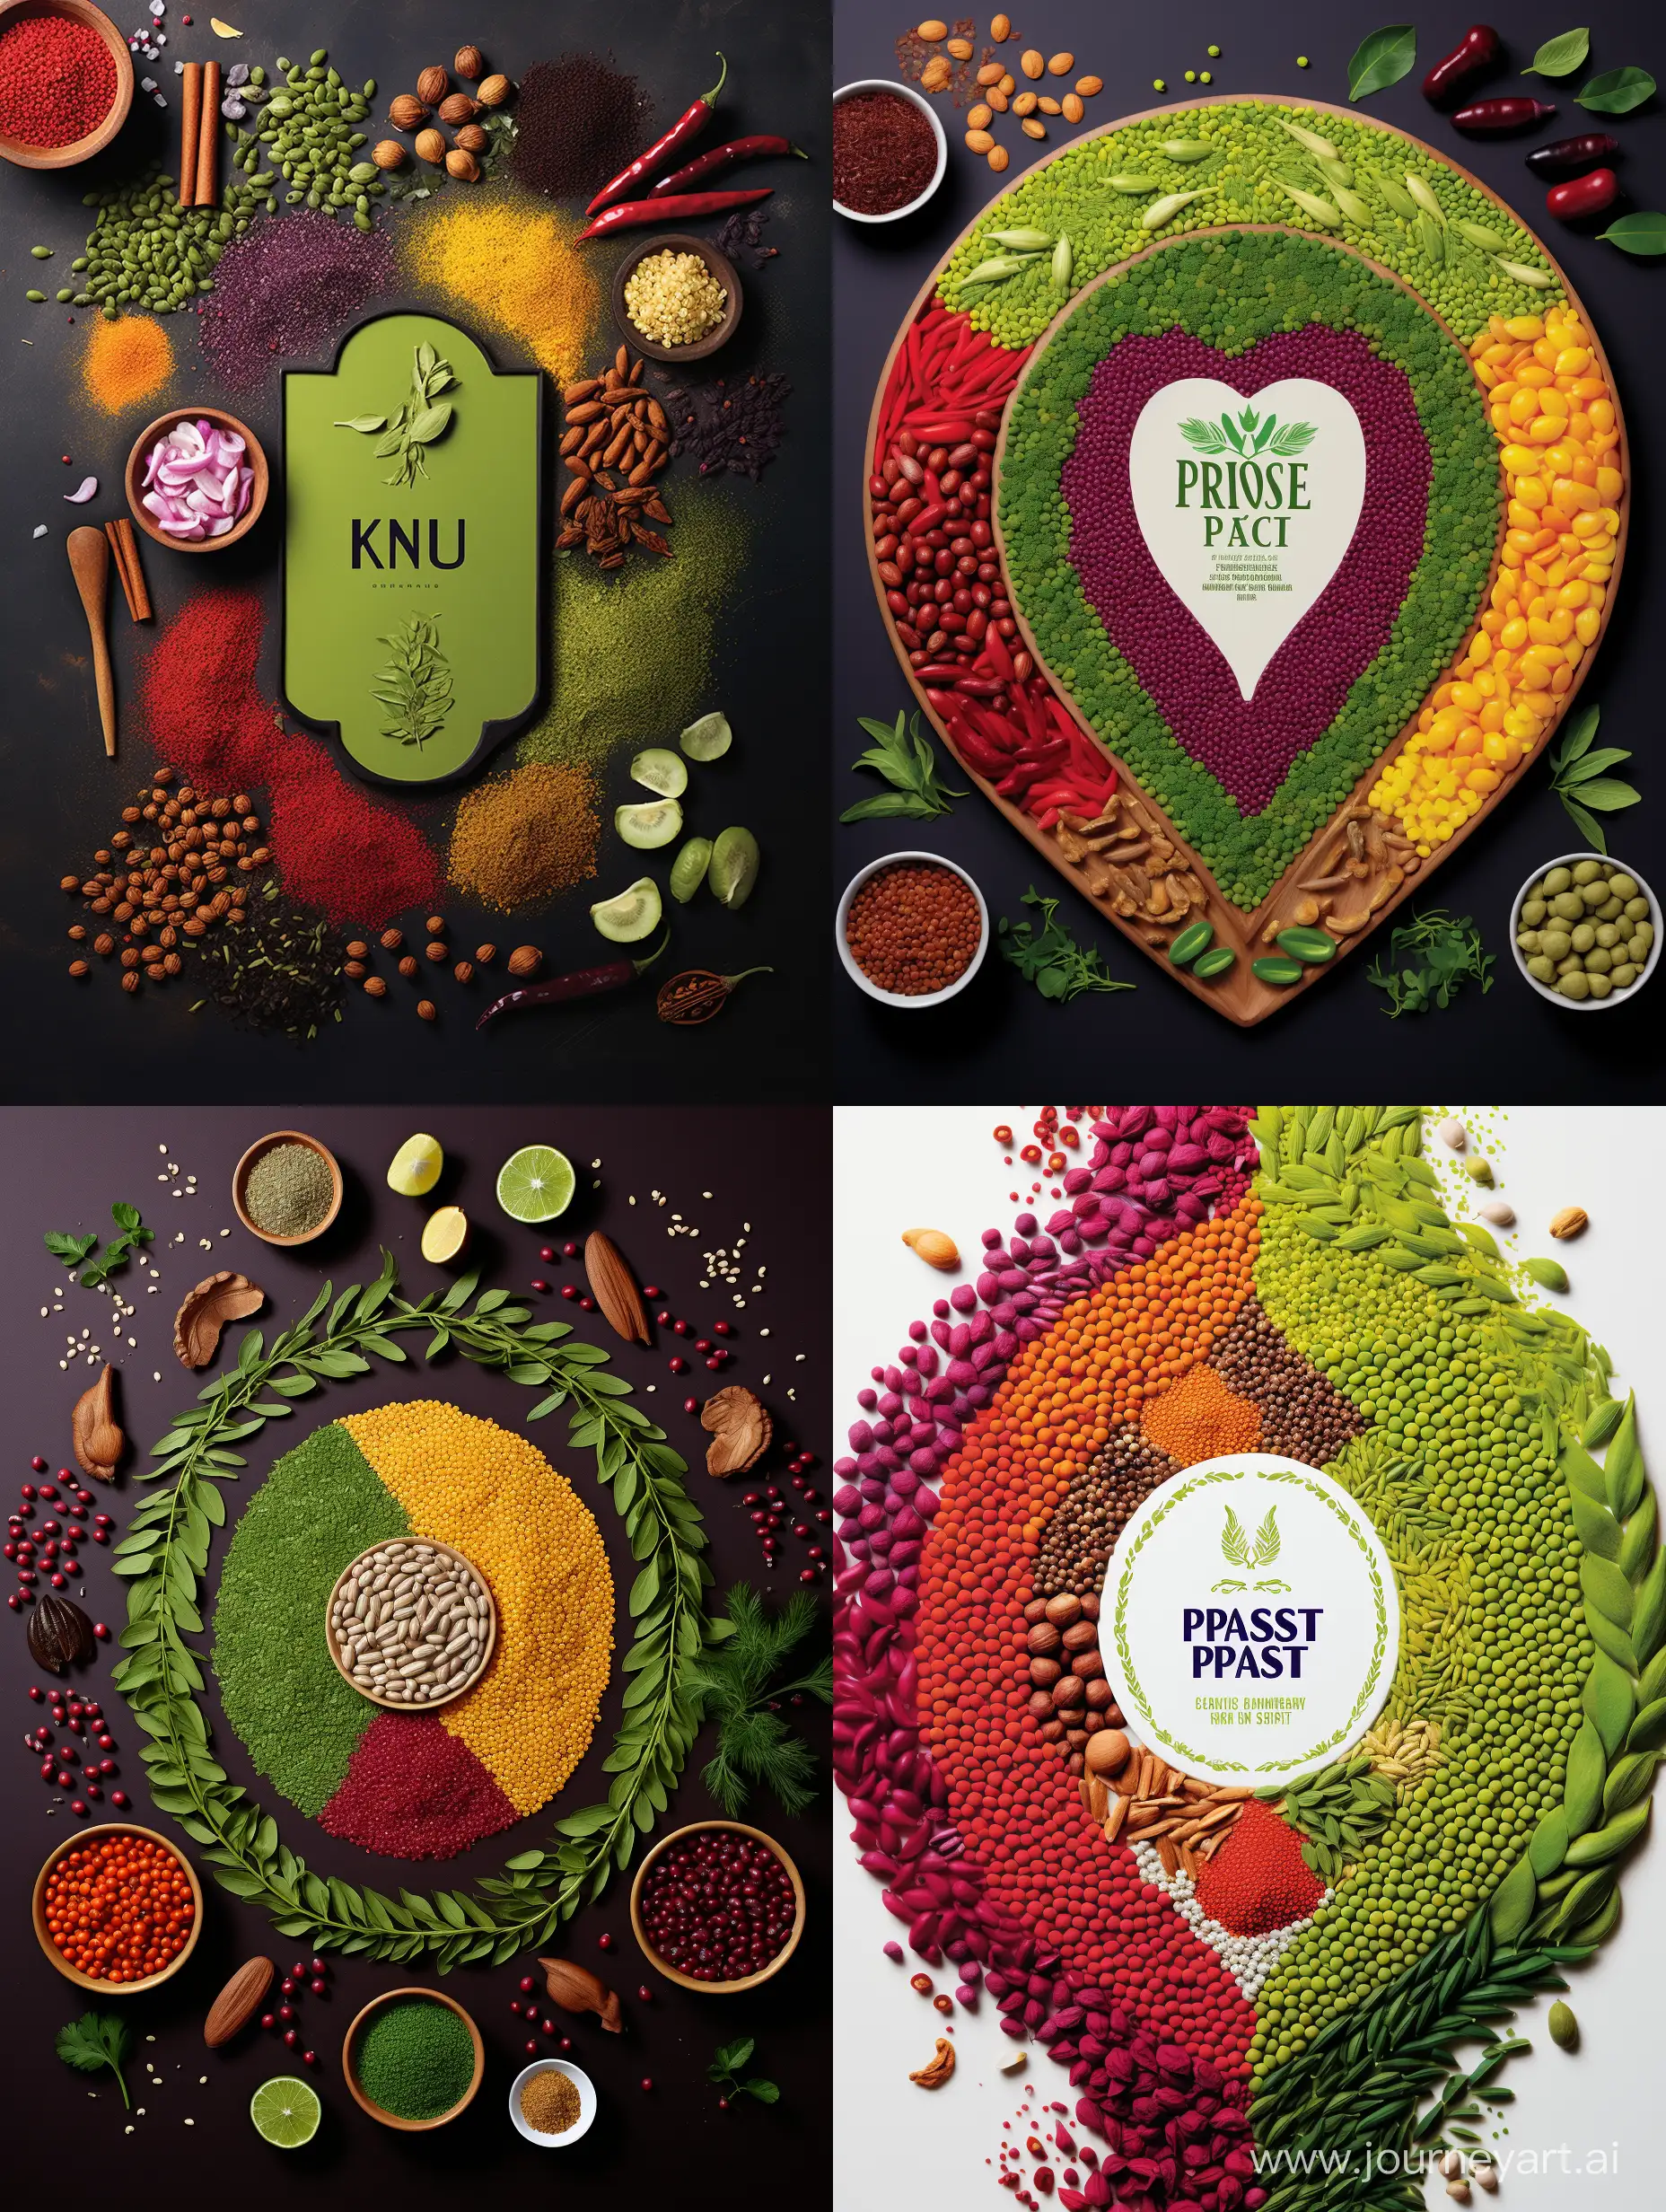 Design a vibrant and creative product image featuring a variety of pulses: Desi chickpeas, Red Speckled kidney beans, Fava beans, Green Mung beans, Light Speckled Kidney beans, and White pea beans. Arrange the pulses in an artistic, non-overlapping layout, like a mosaic that showcases their distinct shapes and colors. Use contrasting backdrops for each pulse type and enhance the image with clear, bright lighting that highlights their unique textures and makes the colors pop. 